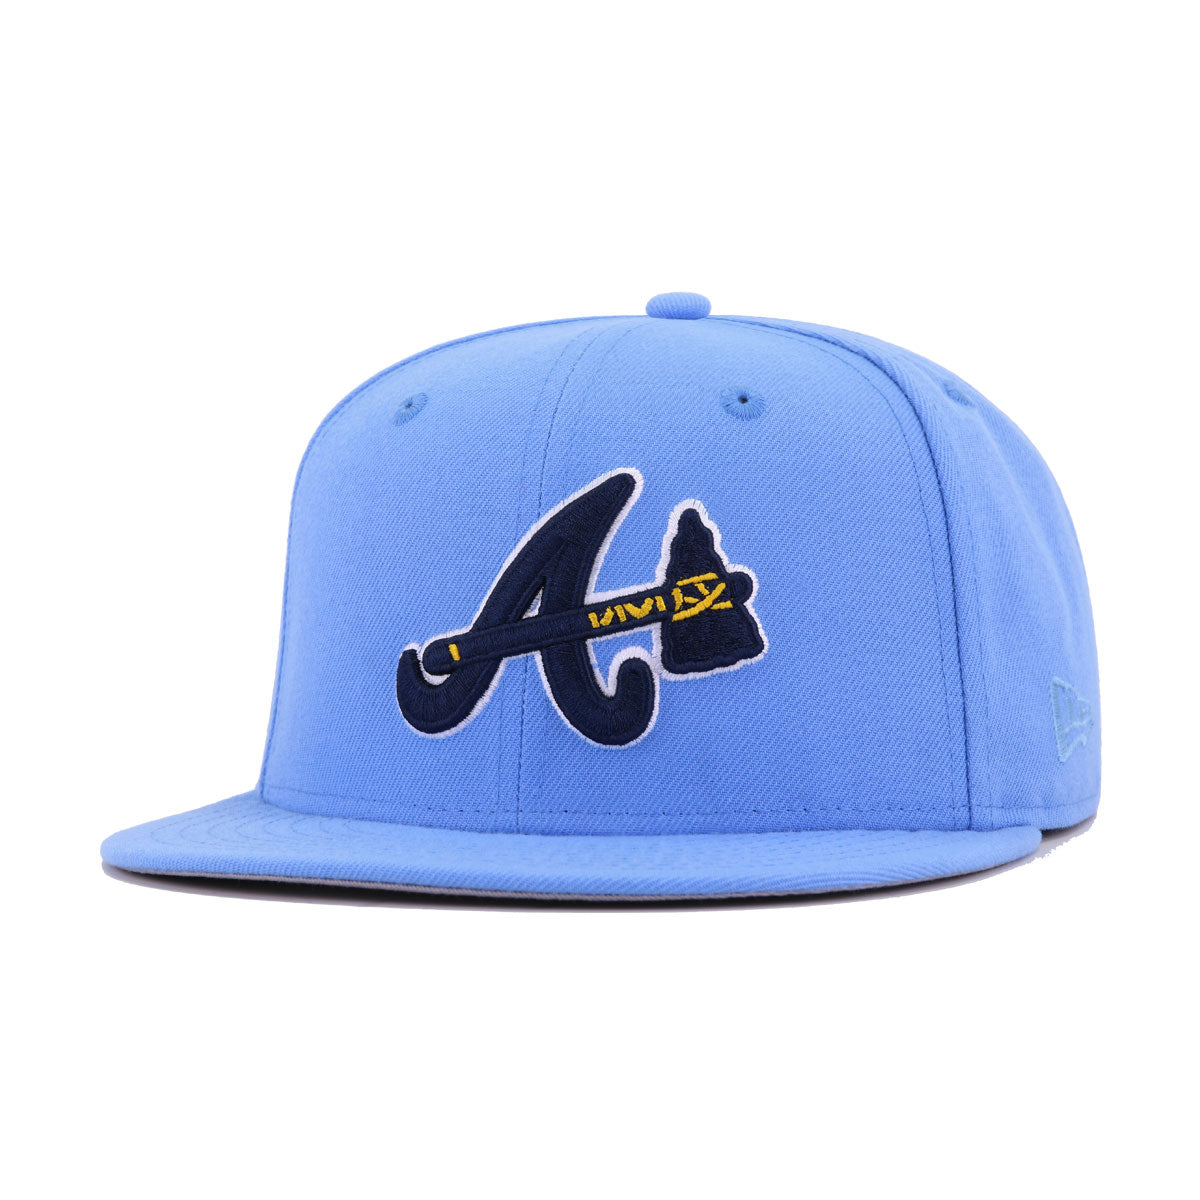 Toronto Blue Jays 40TH ANNIVERSARY New Era 59Fifty Fitted Hat